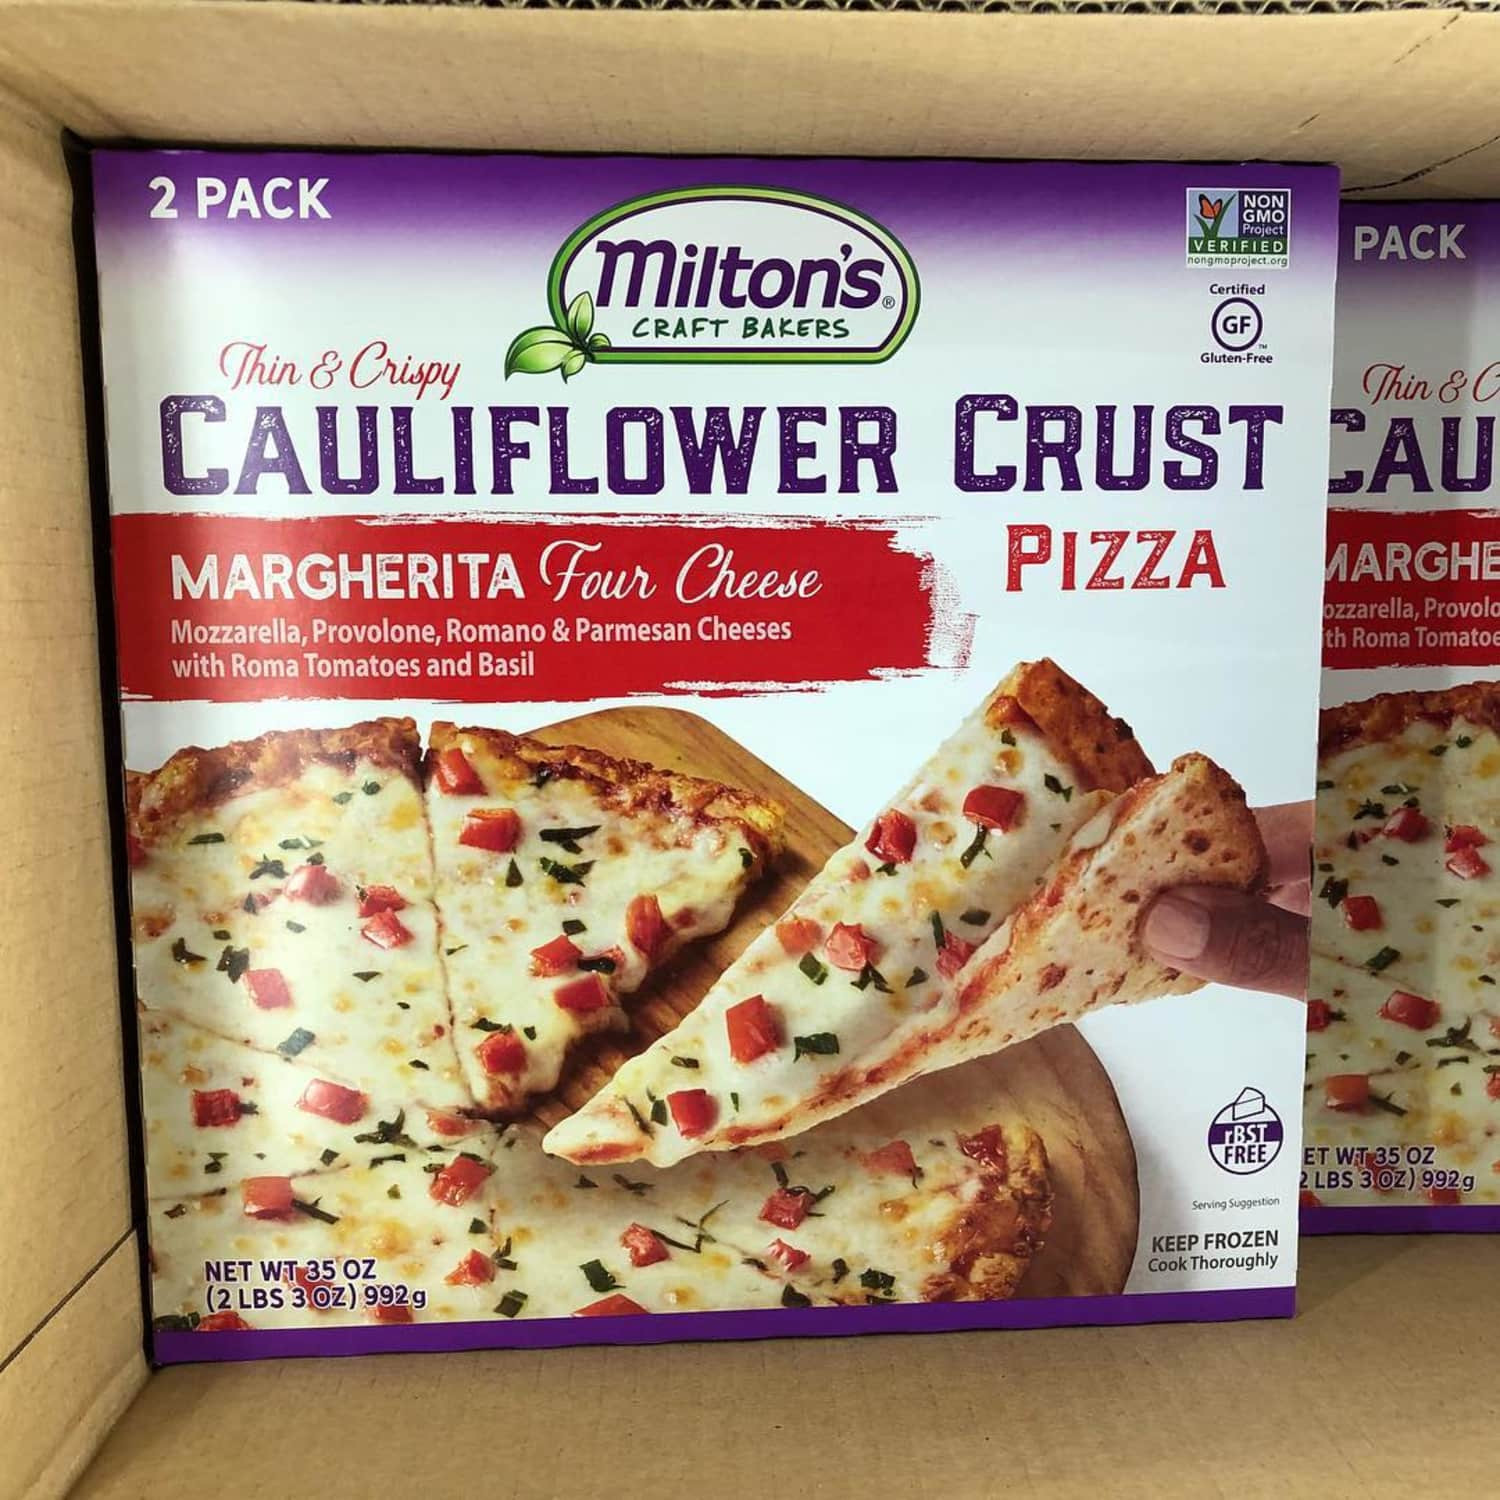 Cauliflower Crust Pizza Costco Unique People are Obsessed with these Cauliflower Pizzas at